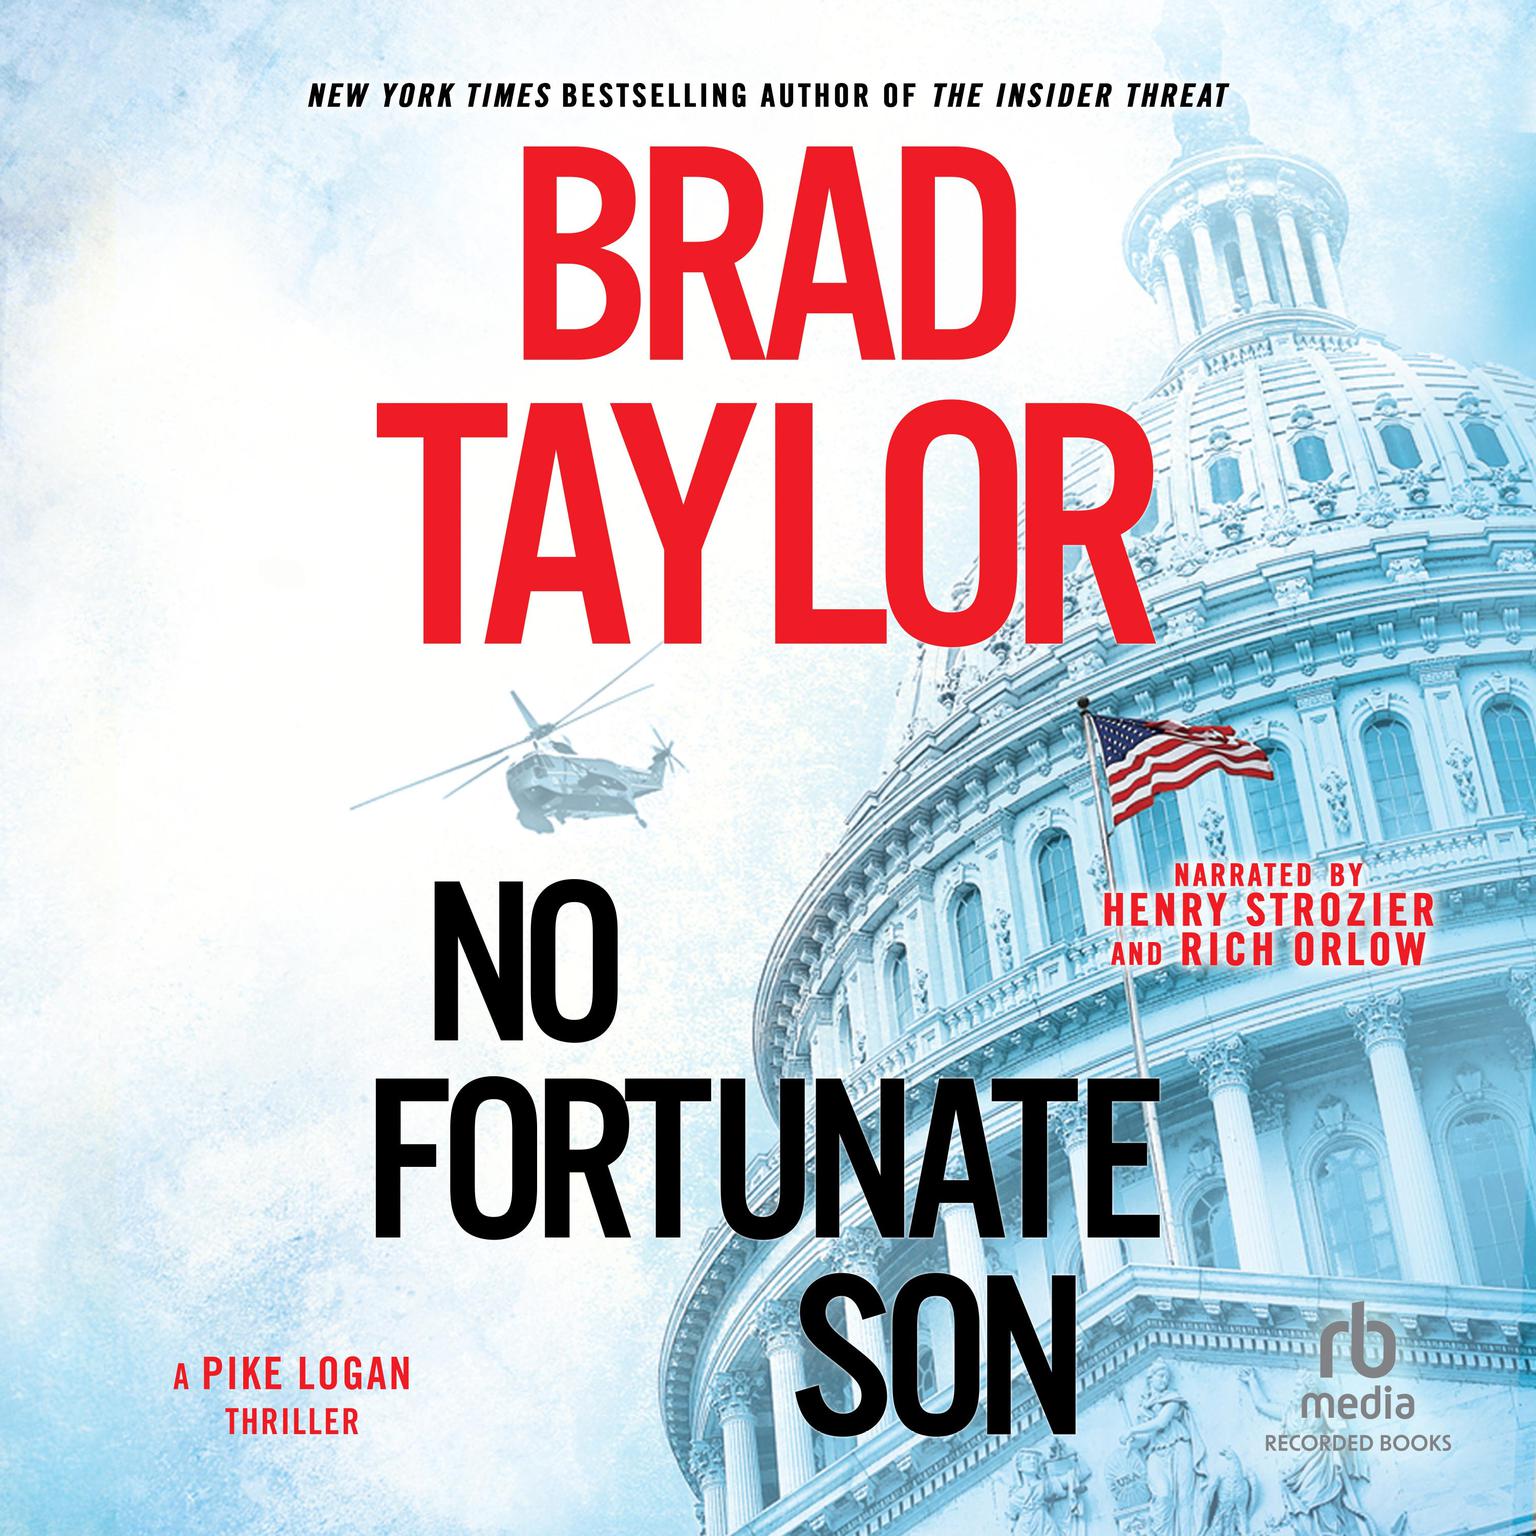 No Fortunate Son Audiobook, by Brad Taylor